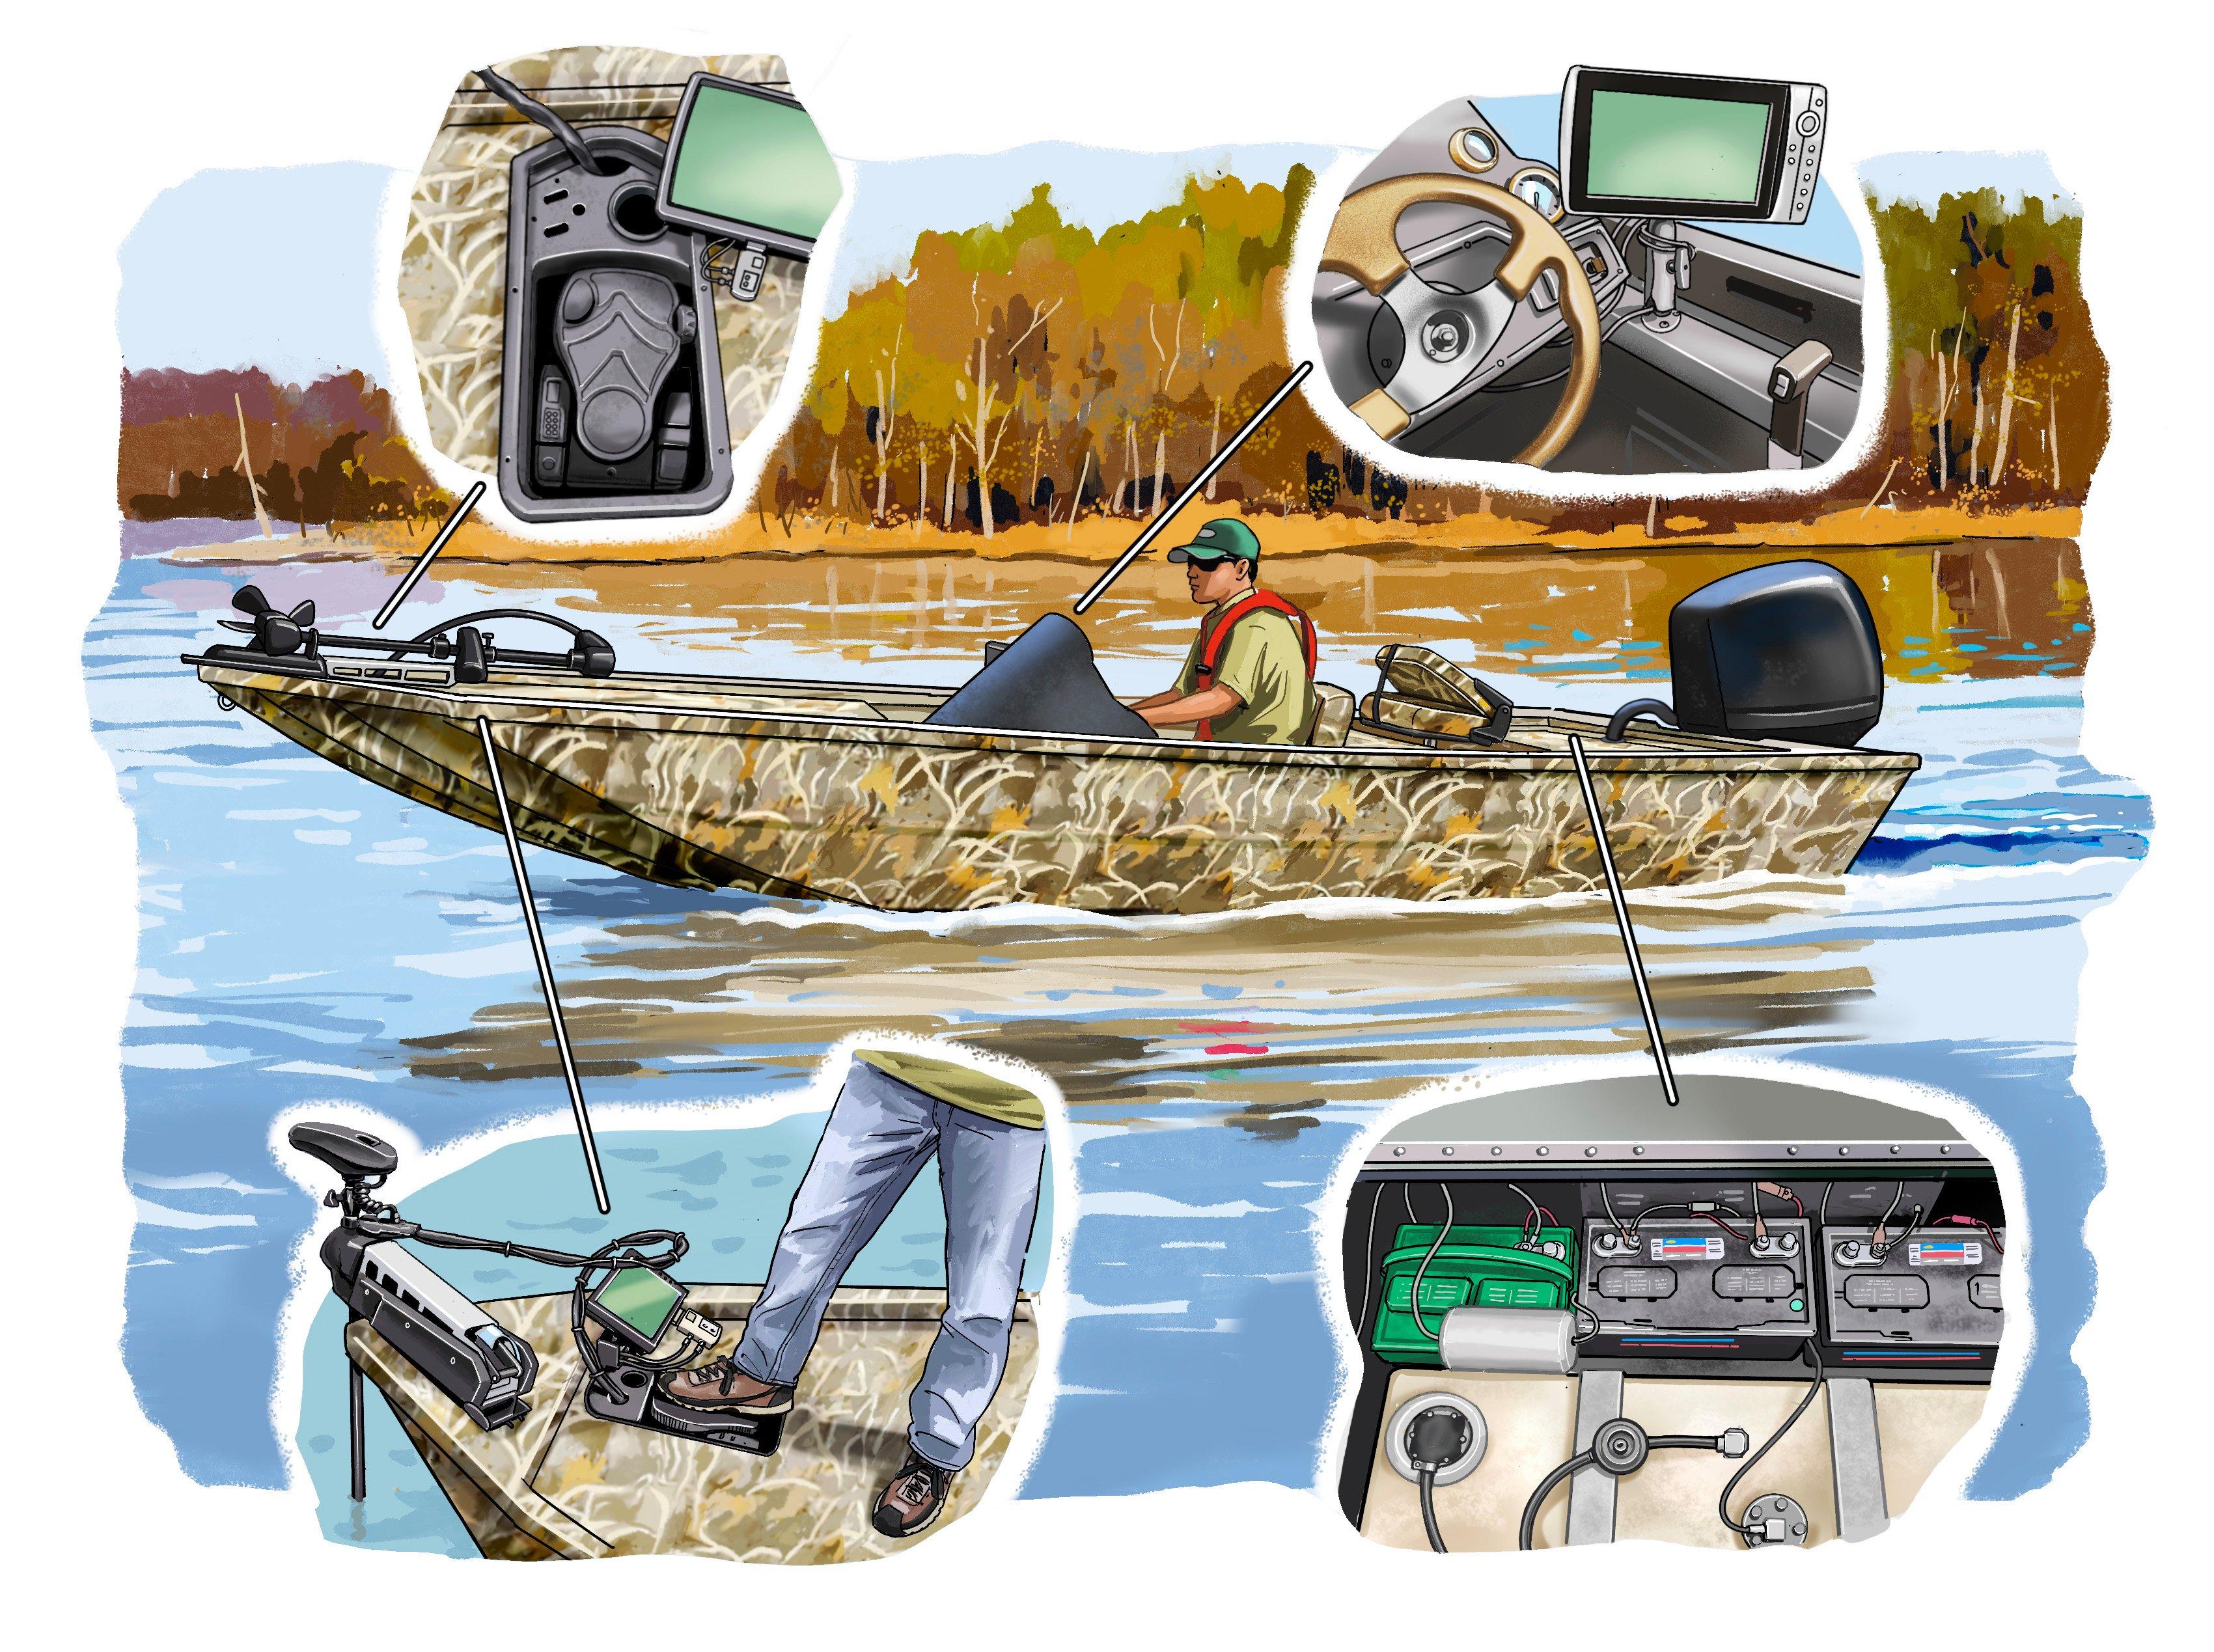 How to Rig an Aluminum Bass Boat - Realtree Camo